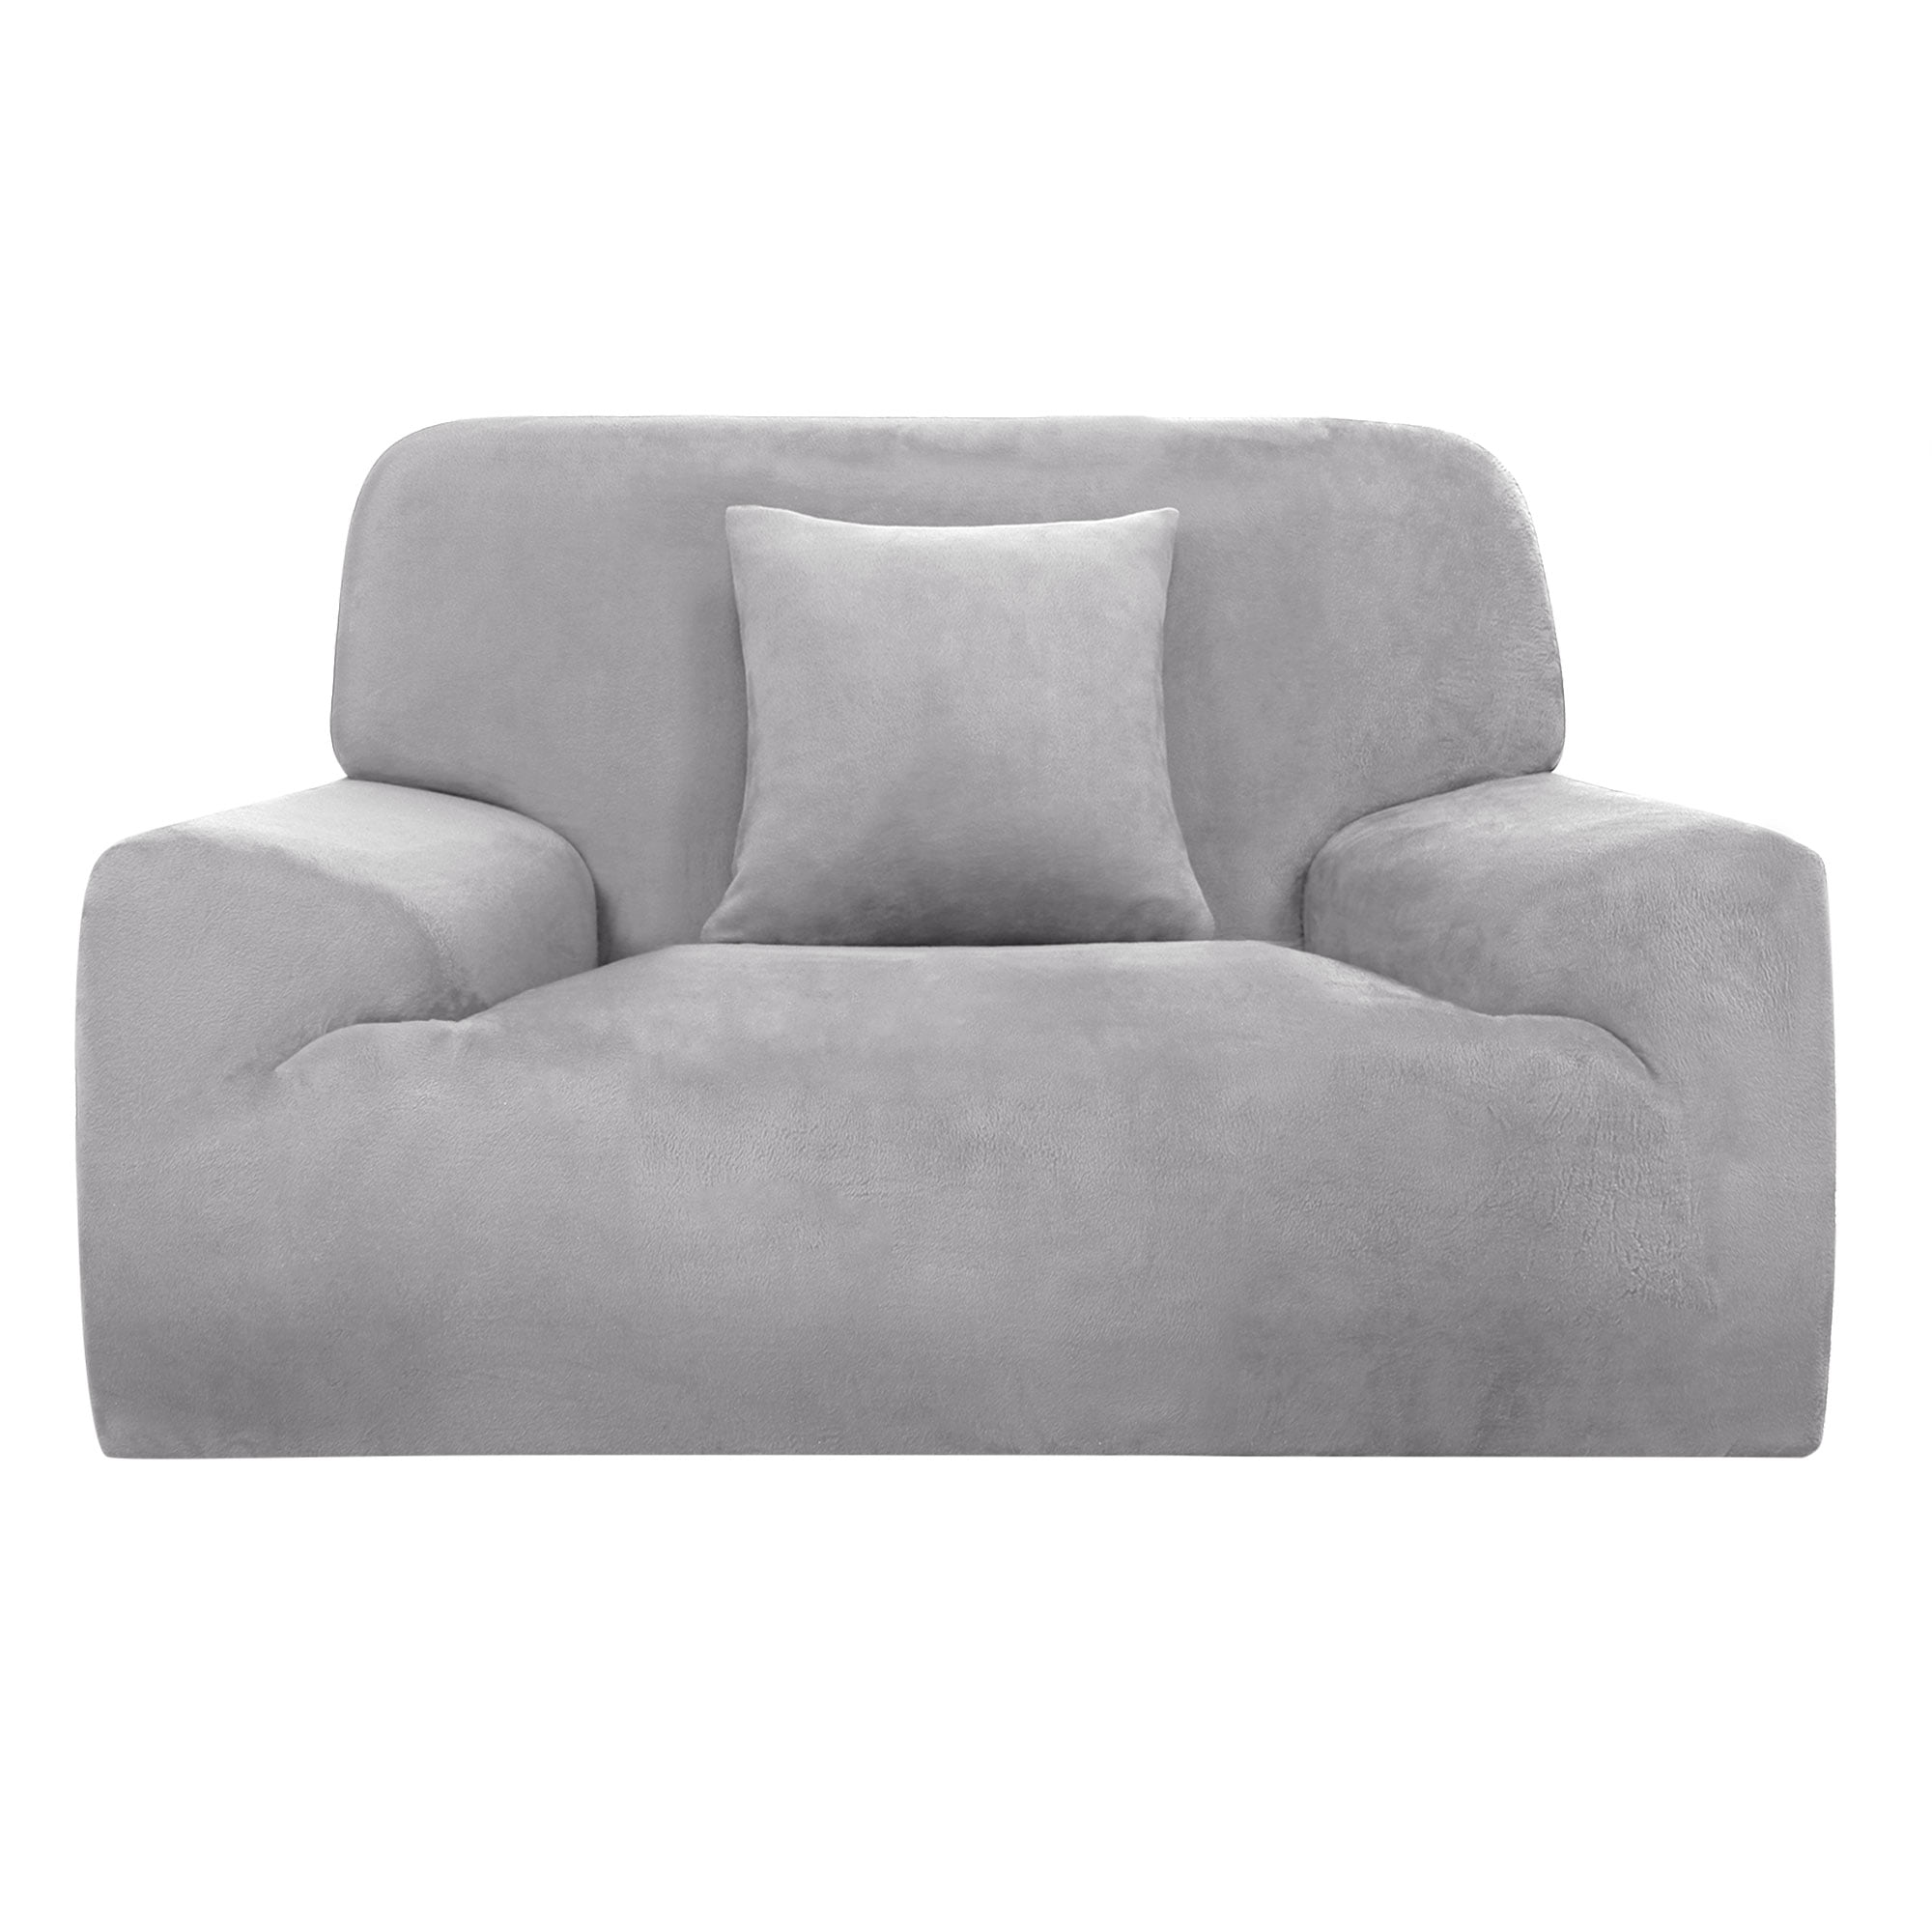 Details about   Plush Fabirc Sofa Cover Thick Slipcover Sofacovers Stretch Elastic Couch Covers 